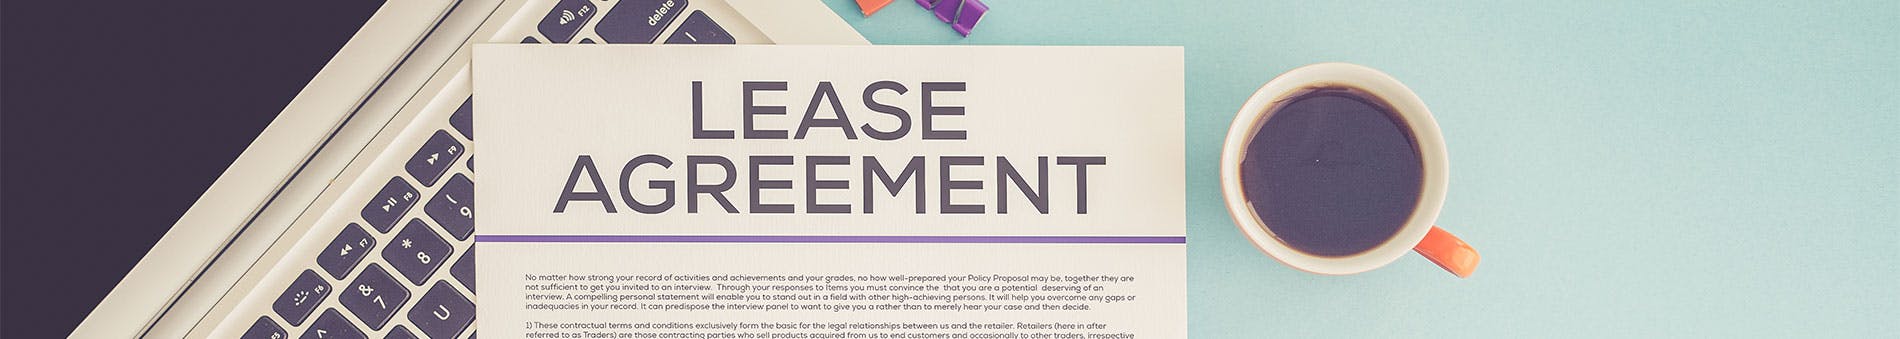 Lease agreement papers